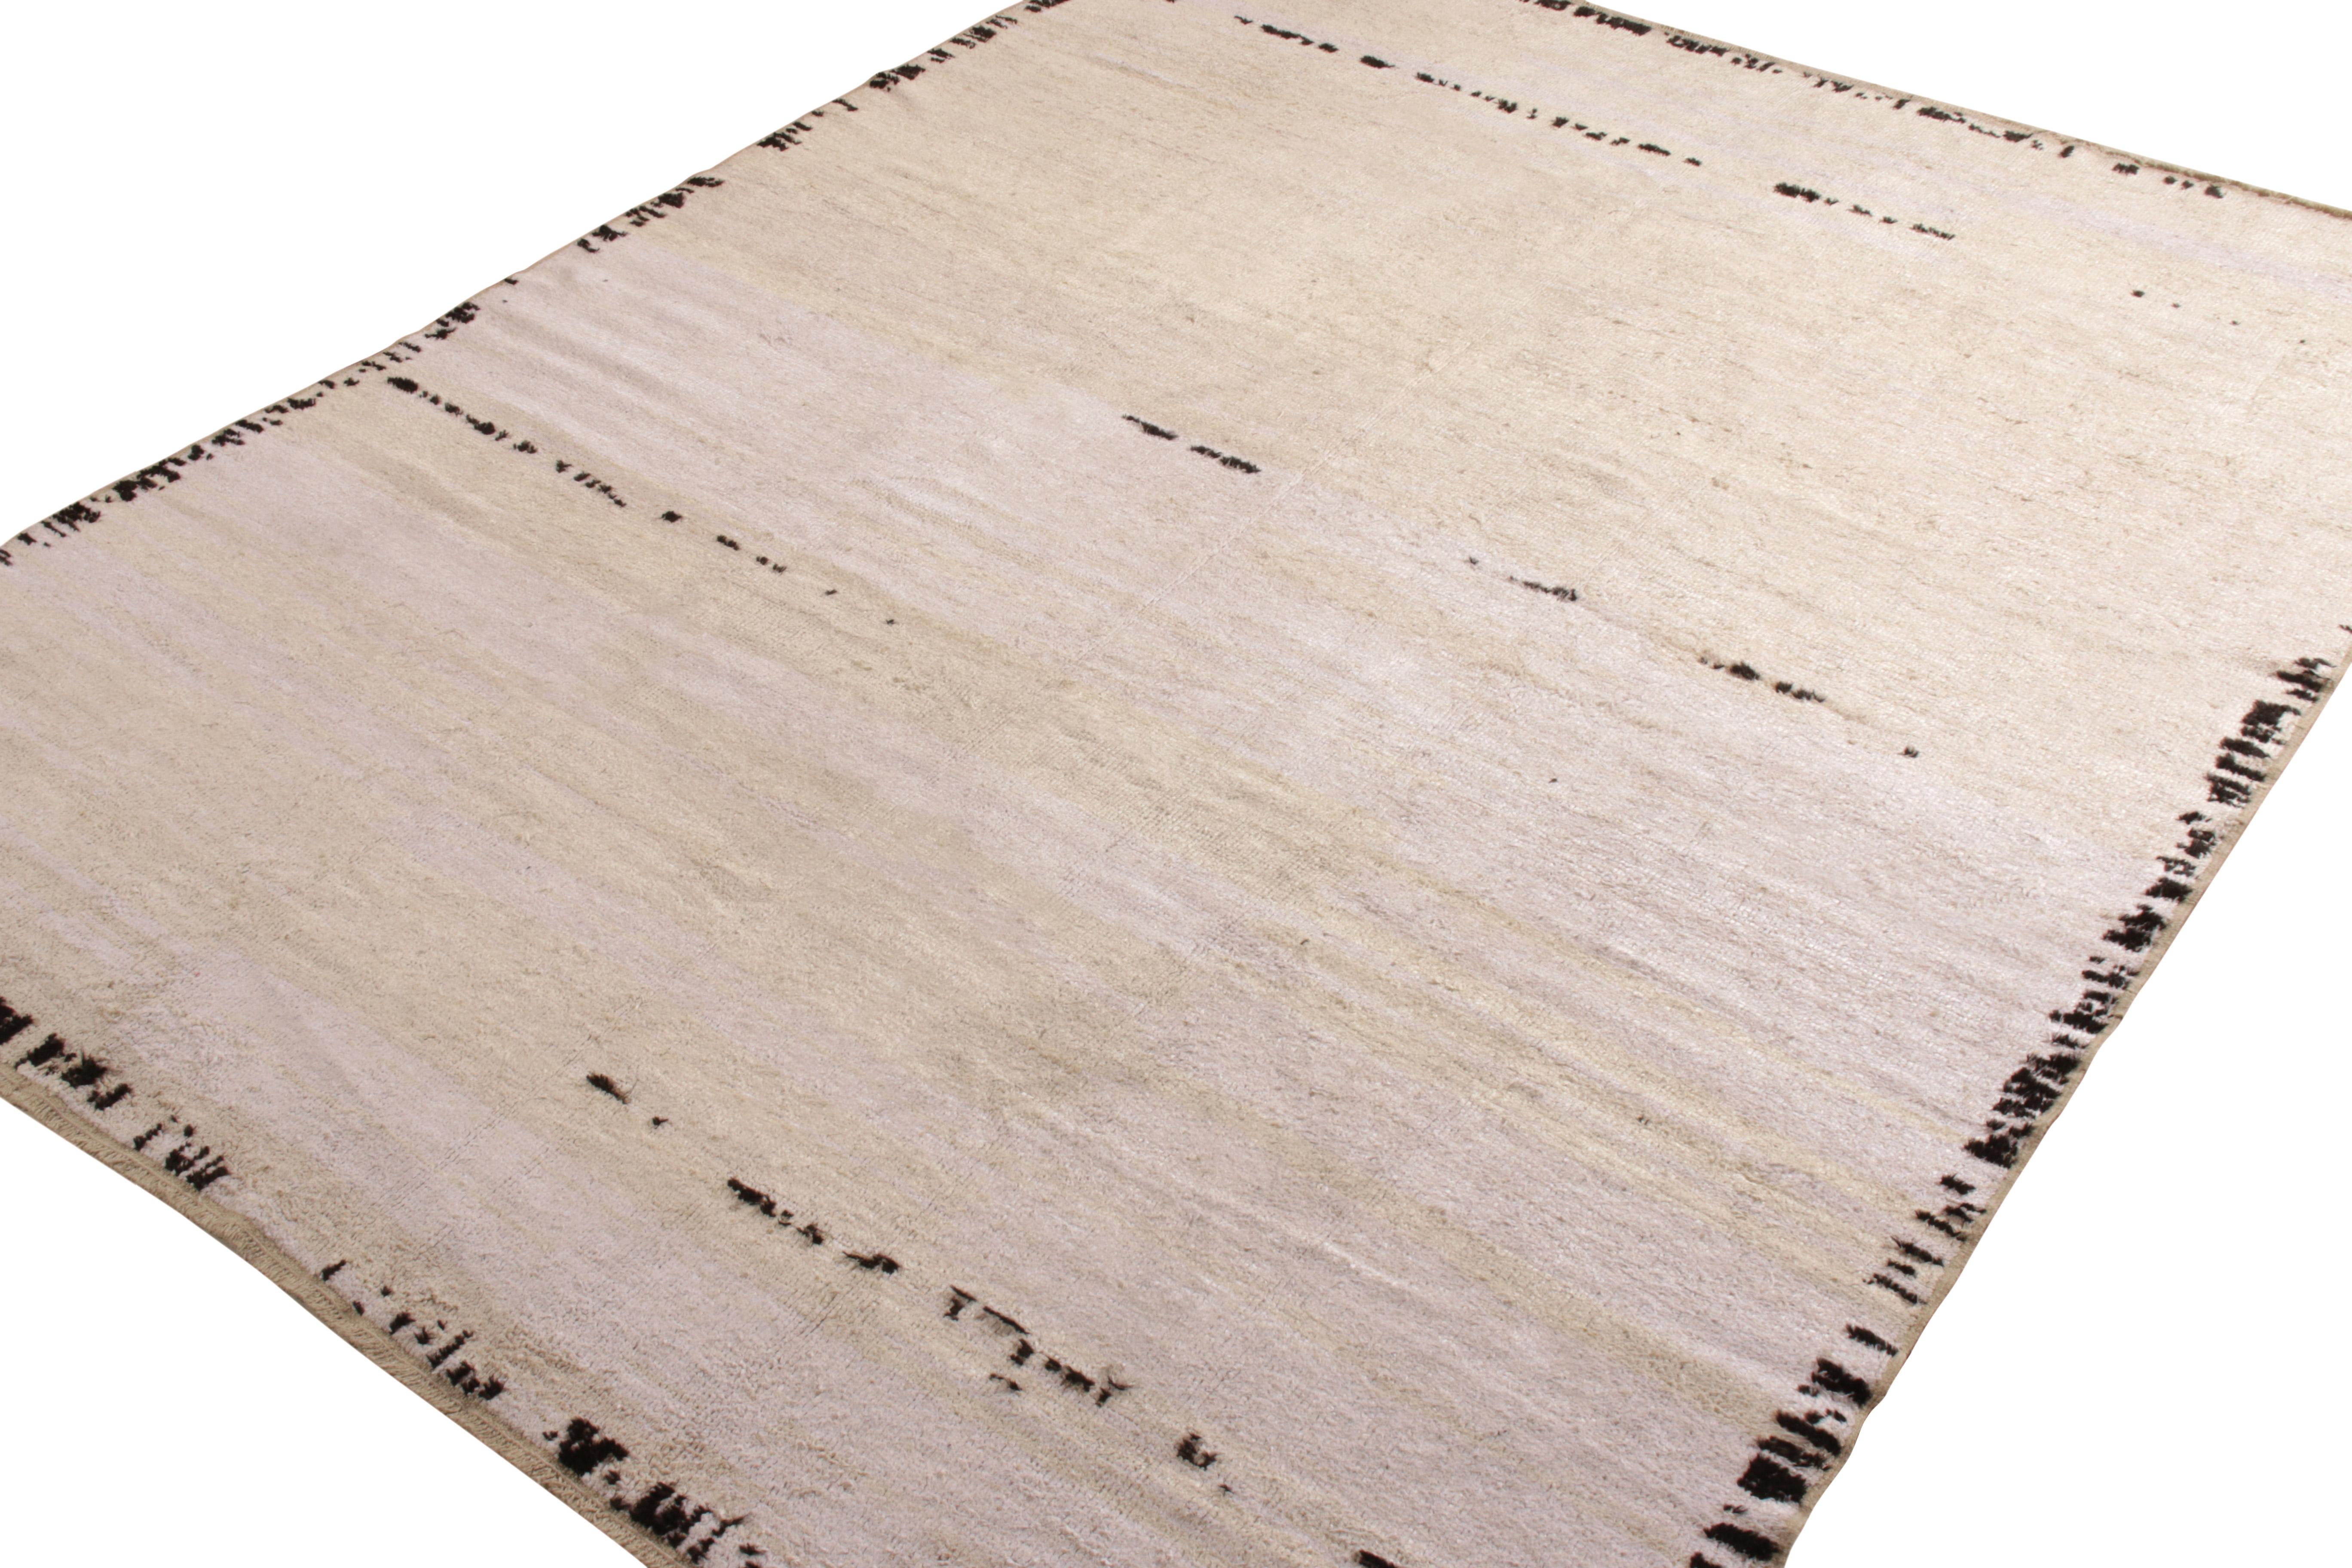 Modern Rug & Kilim’s Contemporary Rug in Off White, Black Solid Stripe Patterns For Sale